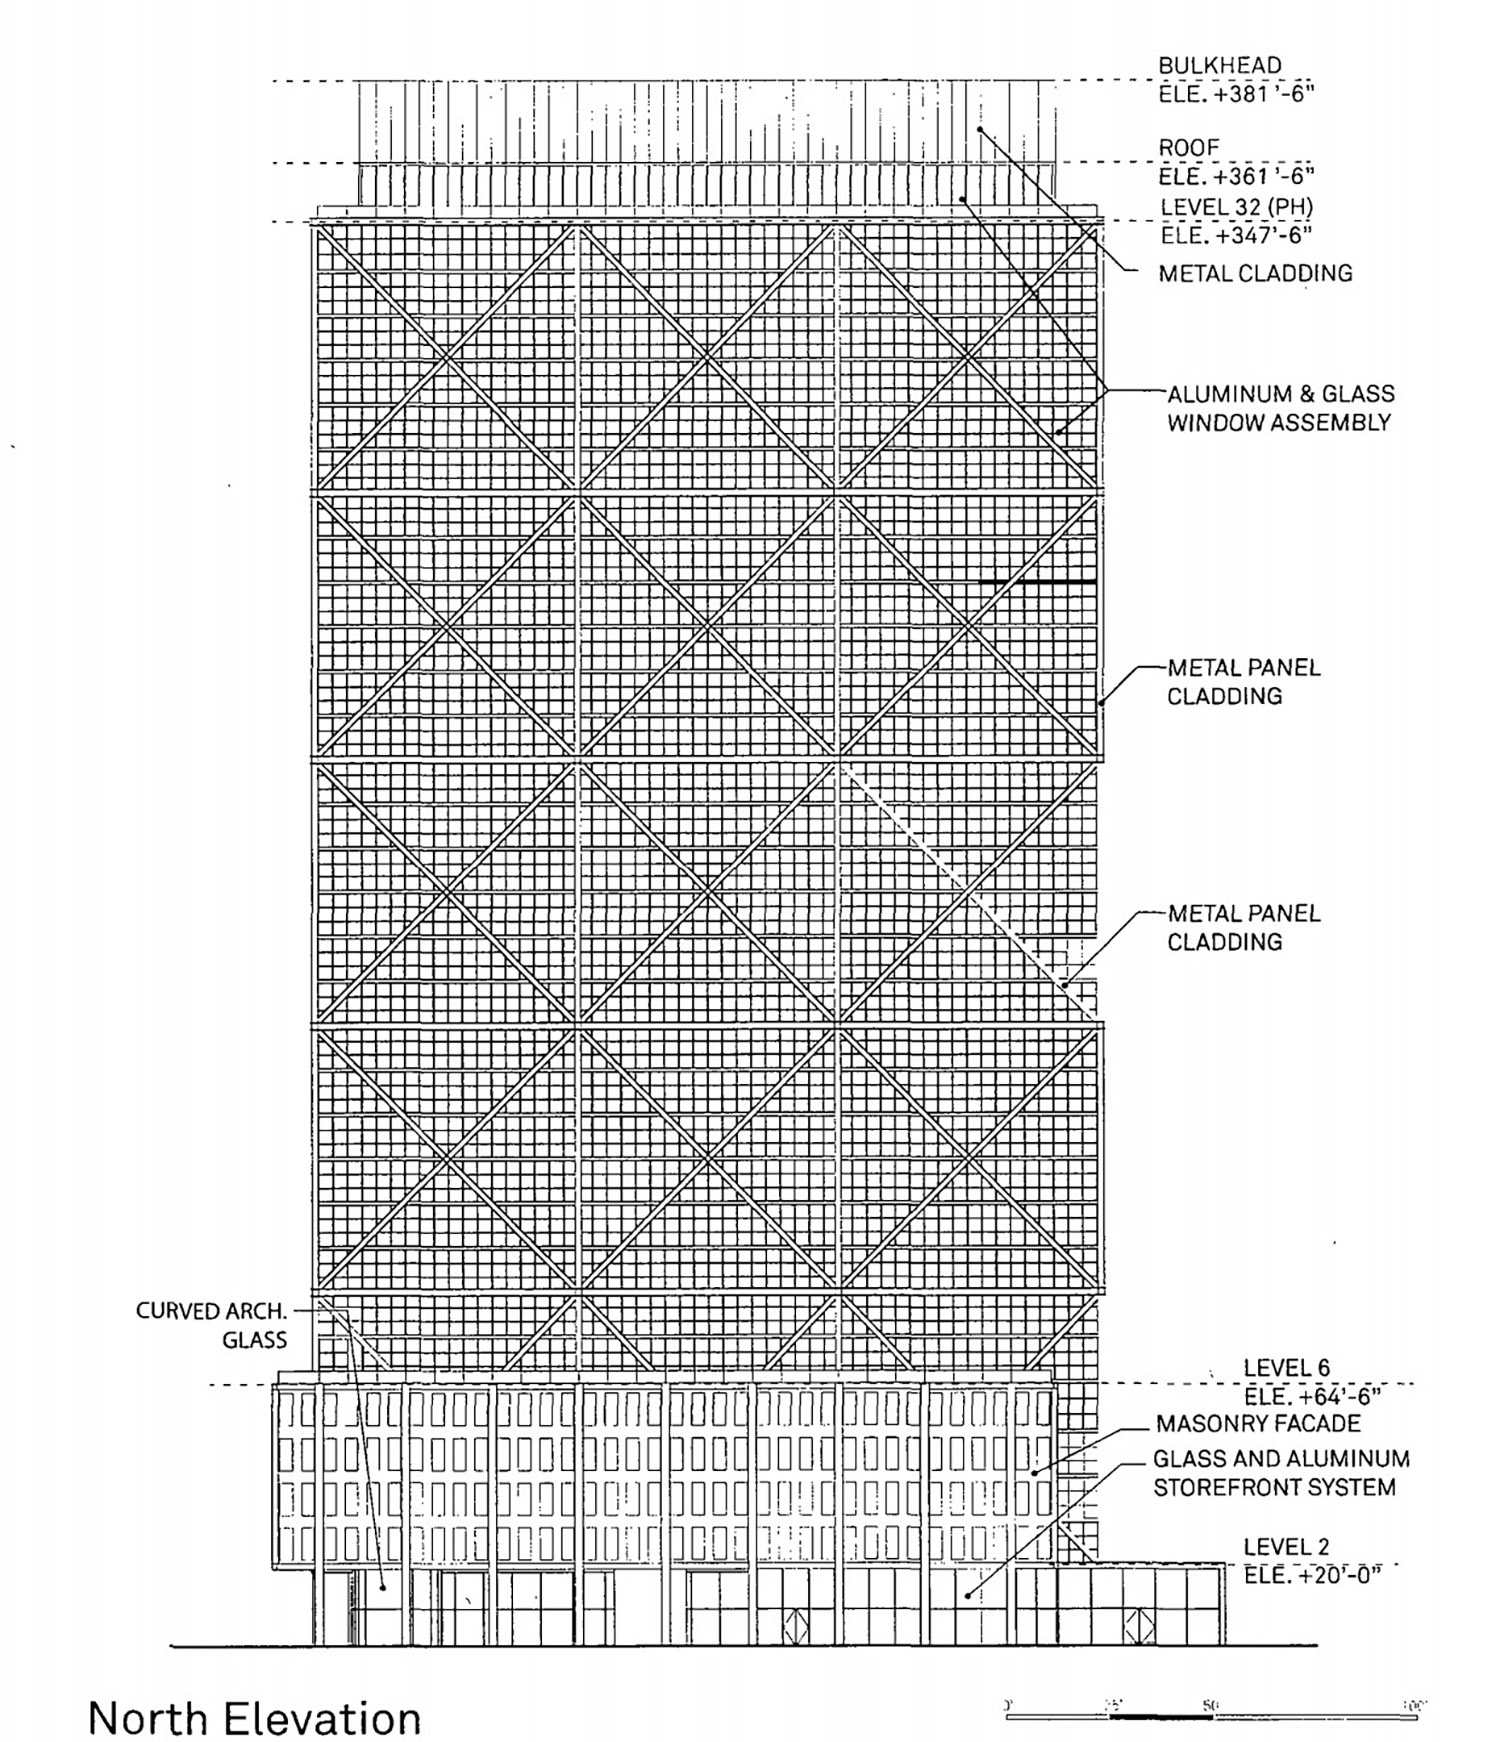 North Elevation for 1201 W Fulton Market. Drawing by Morris Adjmi Architects